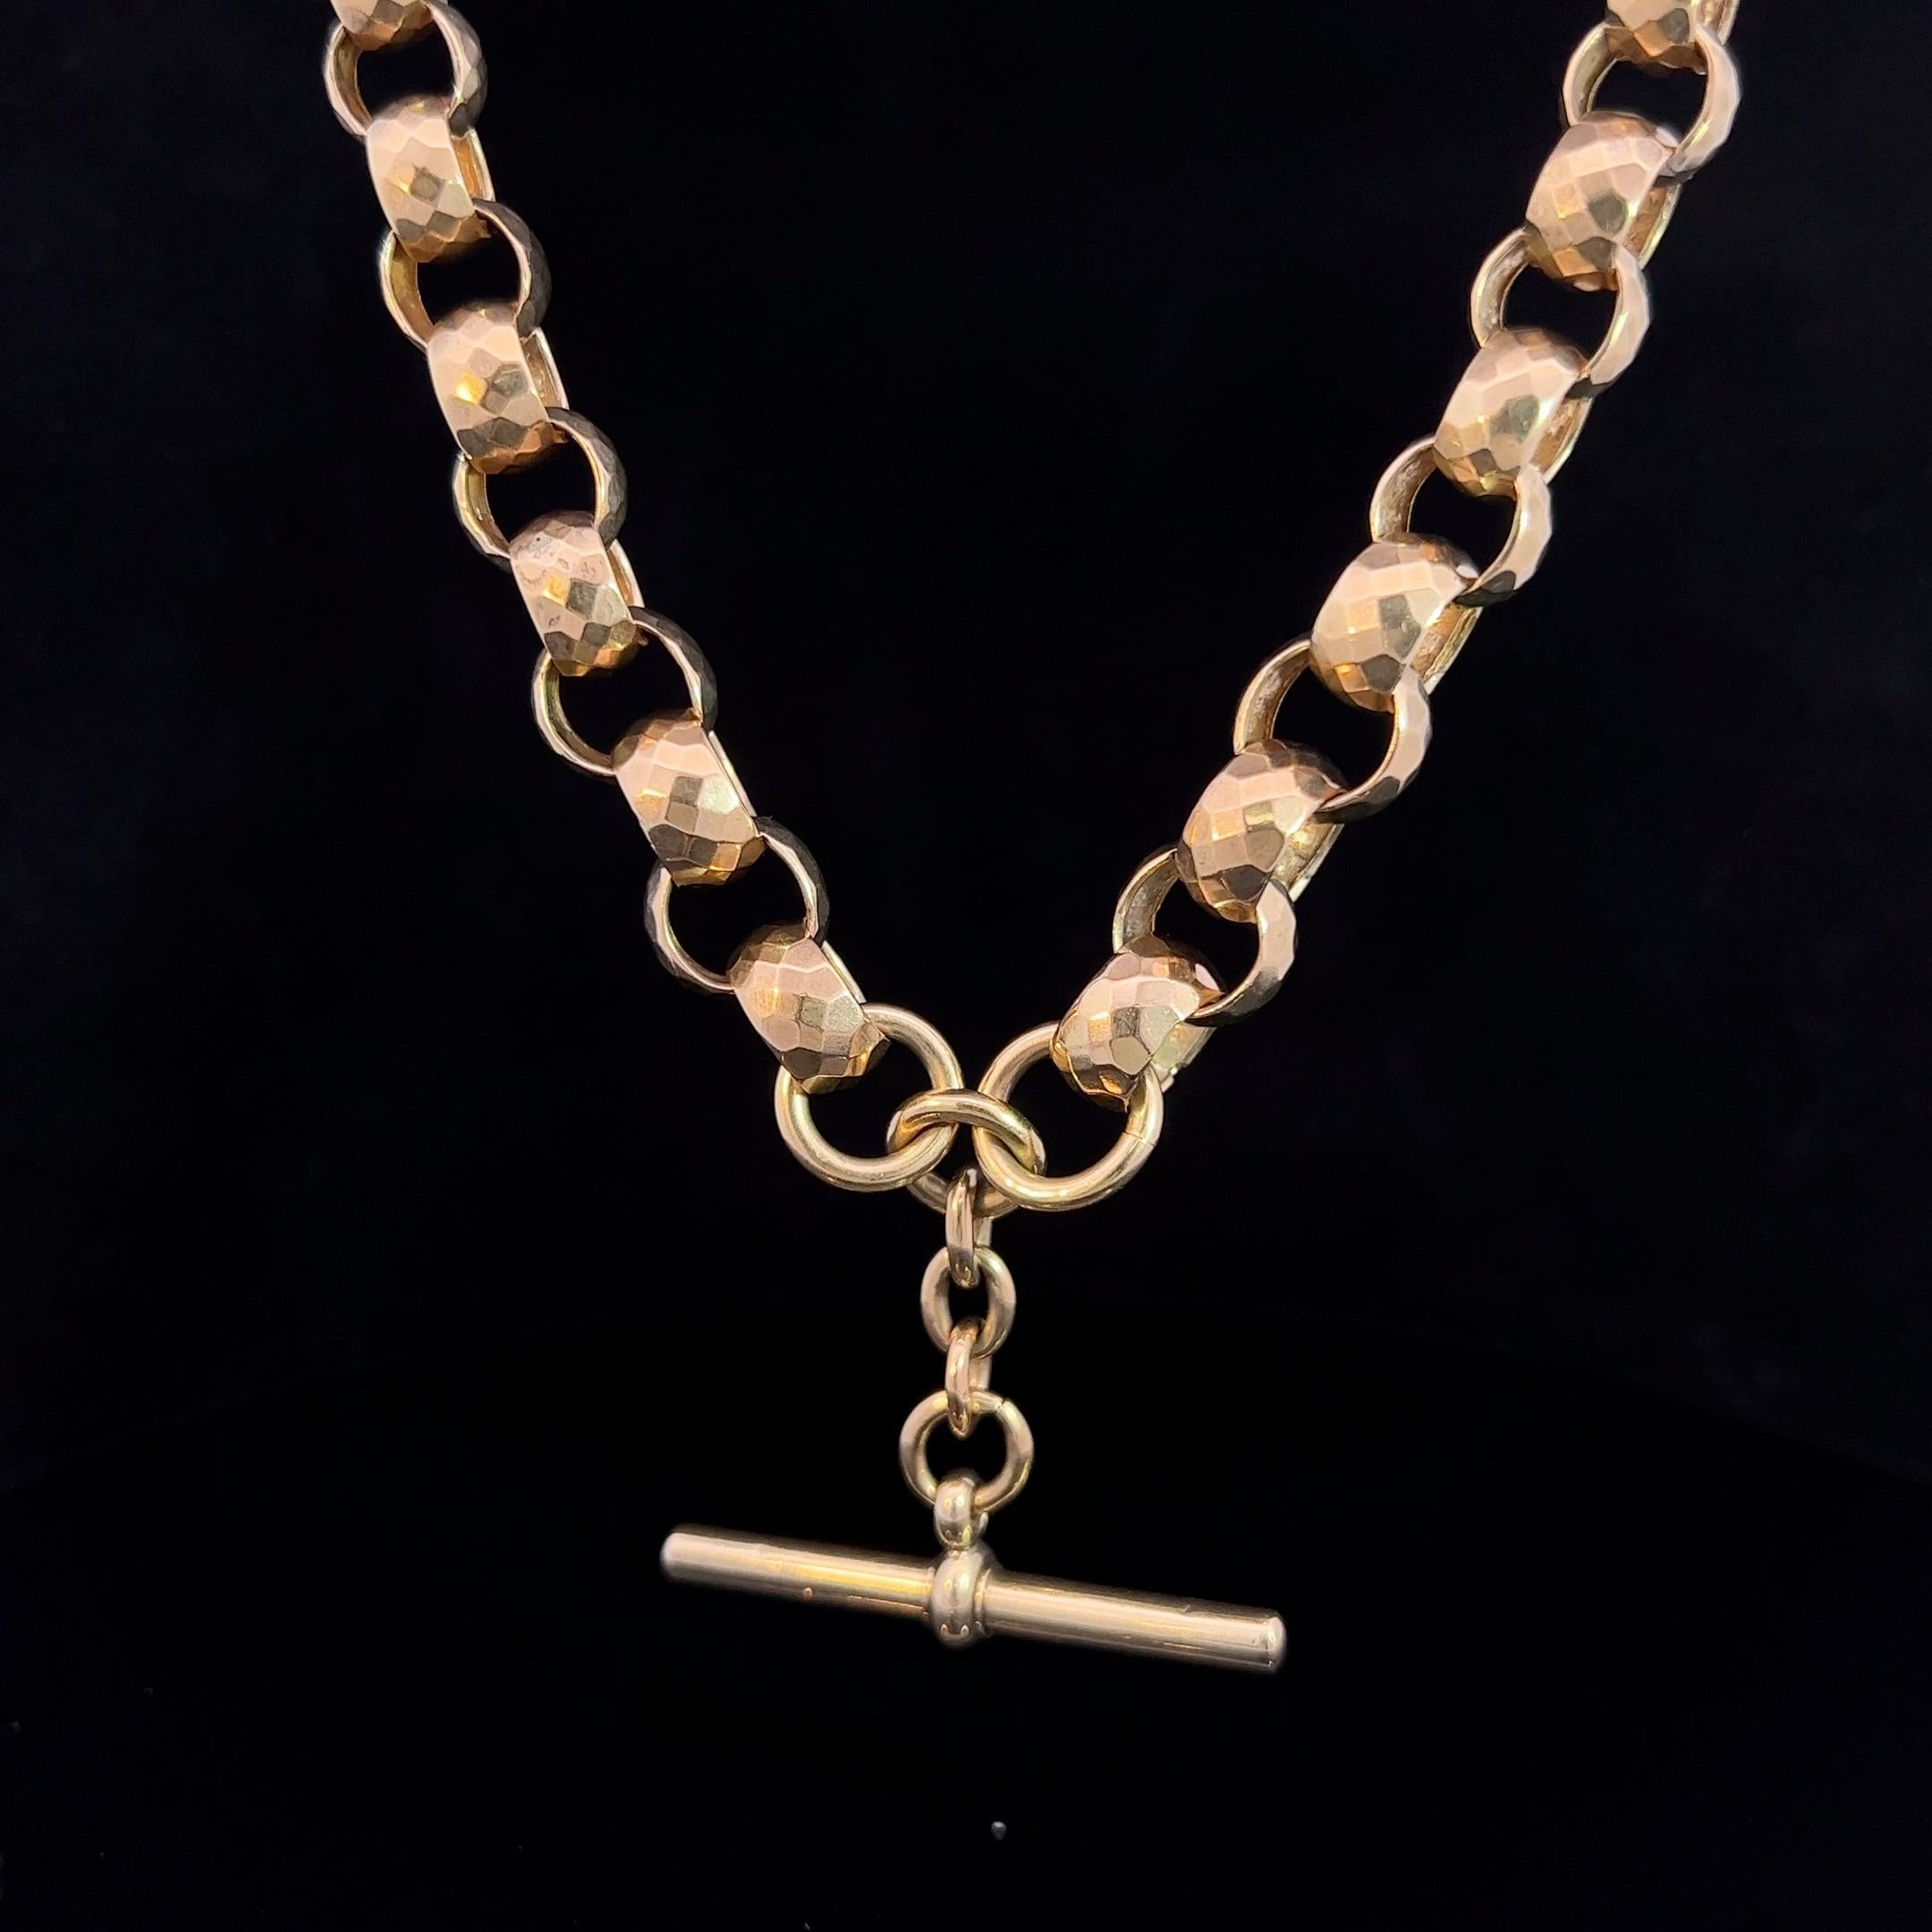 Antique Victorian 9k rose gold Fob chain Circa 1890 -1900 For Sale 1